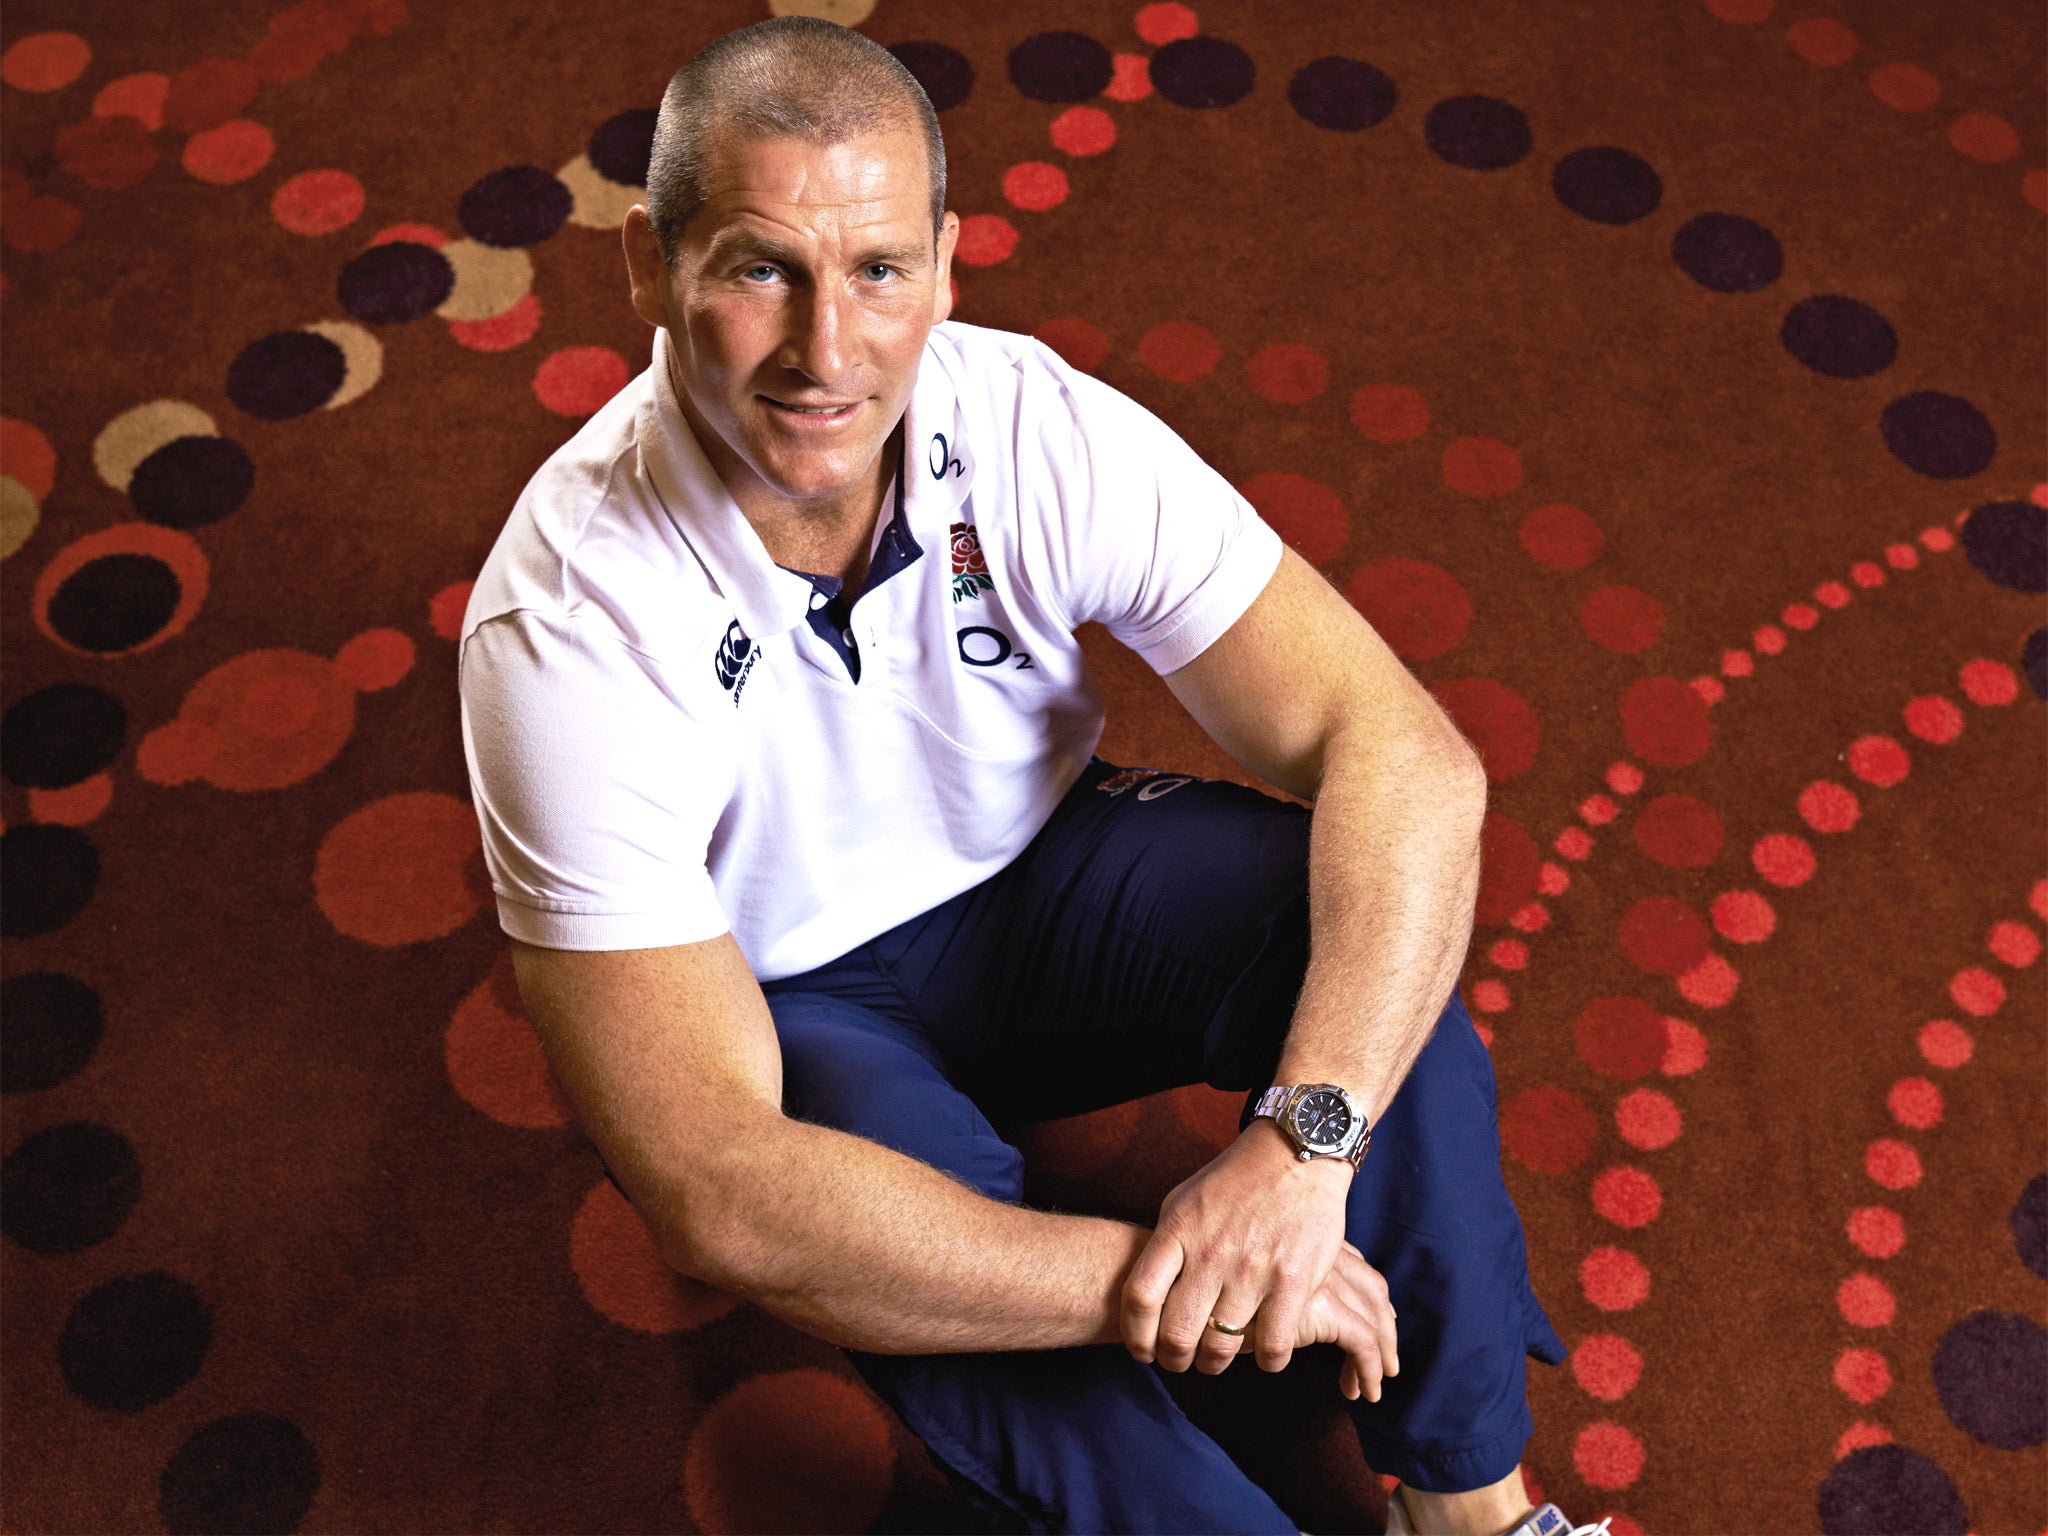 Stuart Lancaster says he would like to carry on beyond the 2015 World Cup